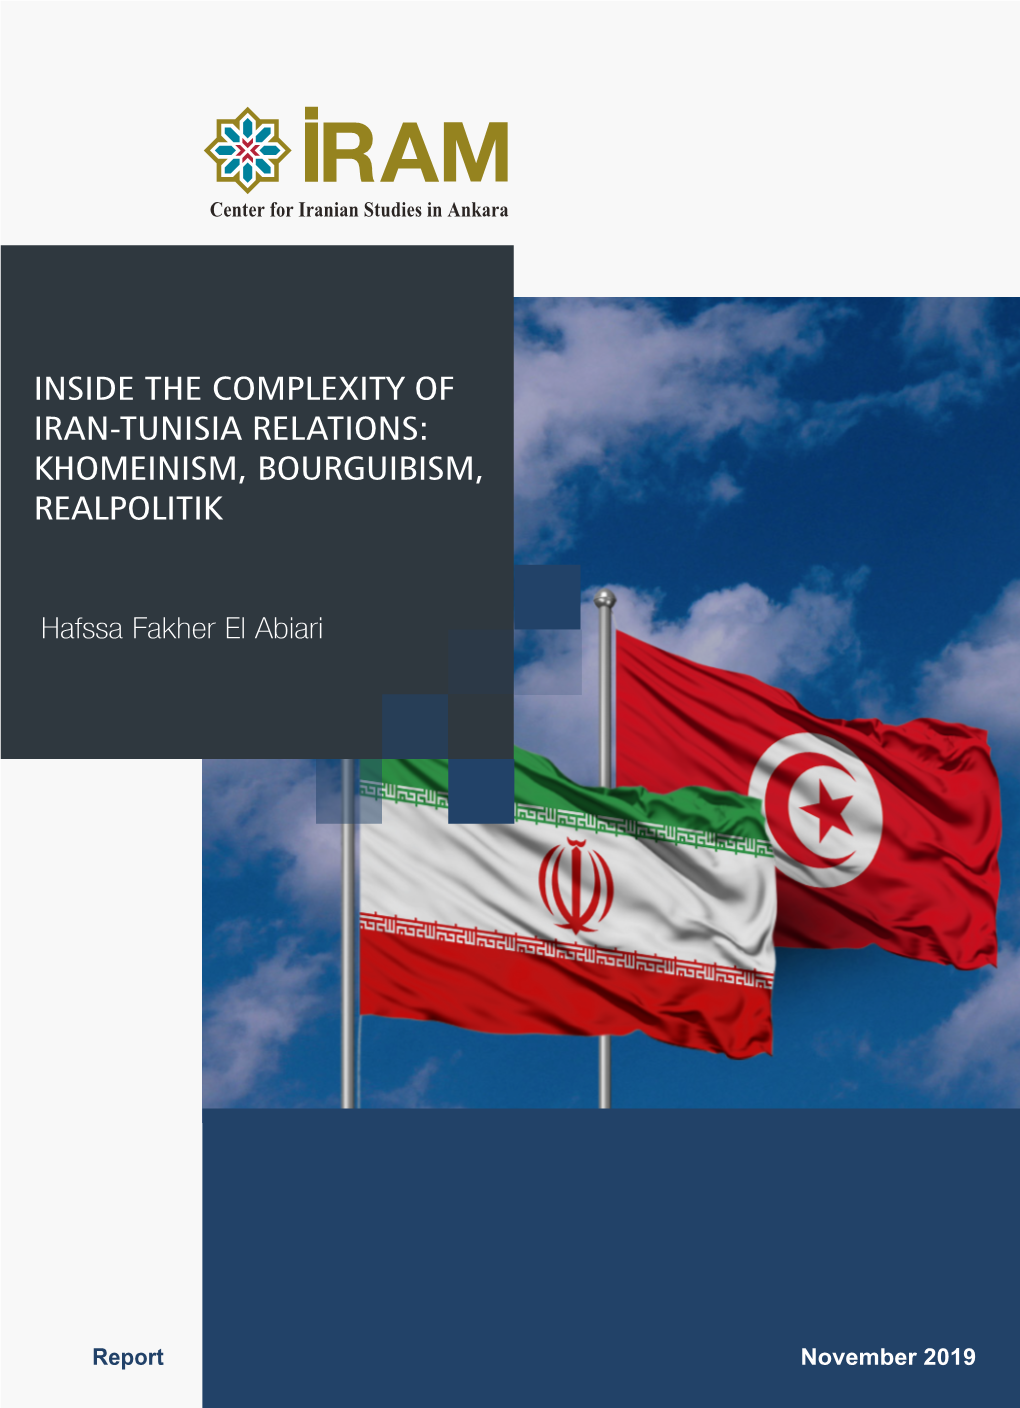 Inside the Complexity of Iran-Tunisia Relations: Khomeinism, Bourguibism, Realpolitik